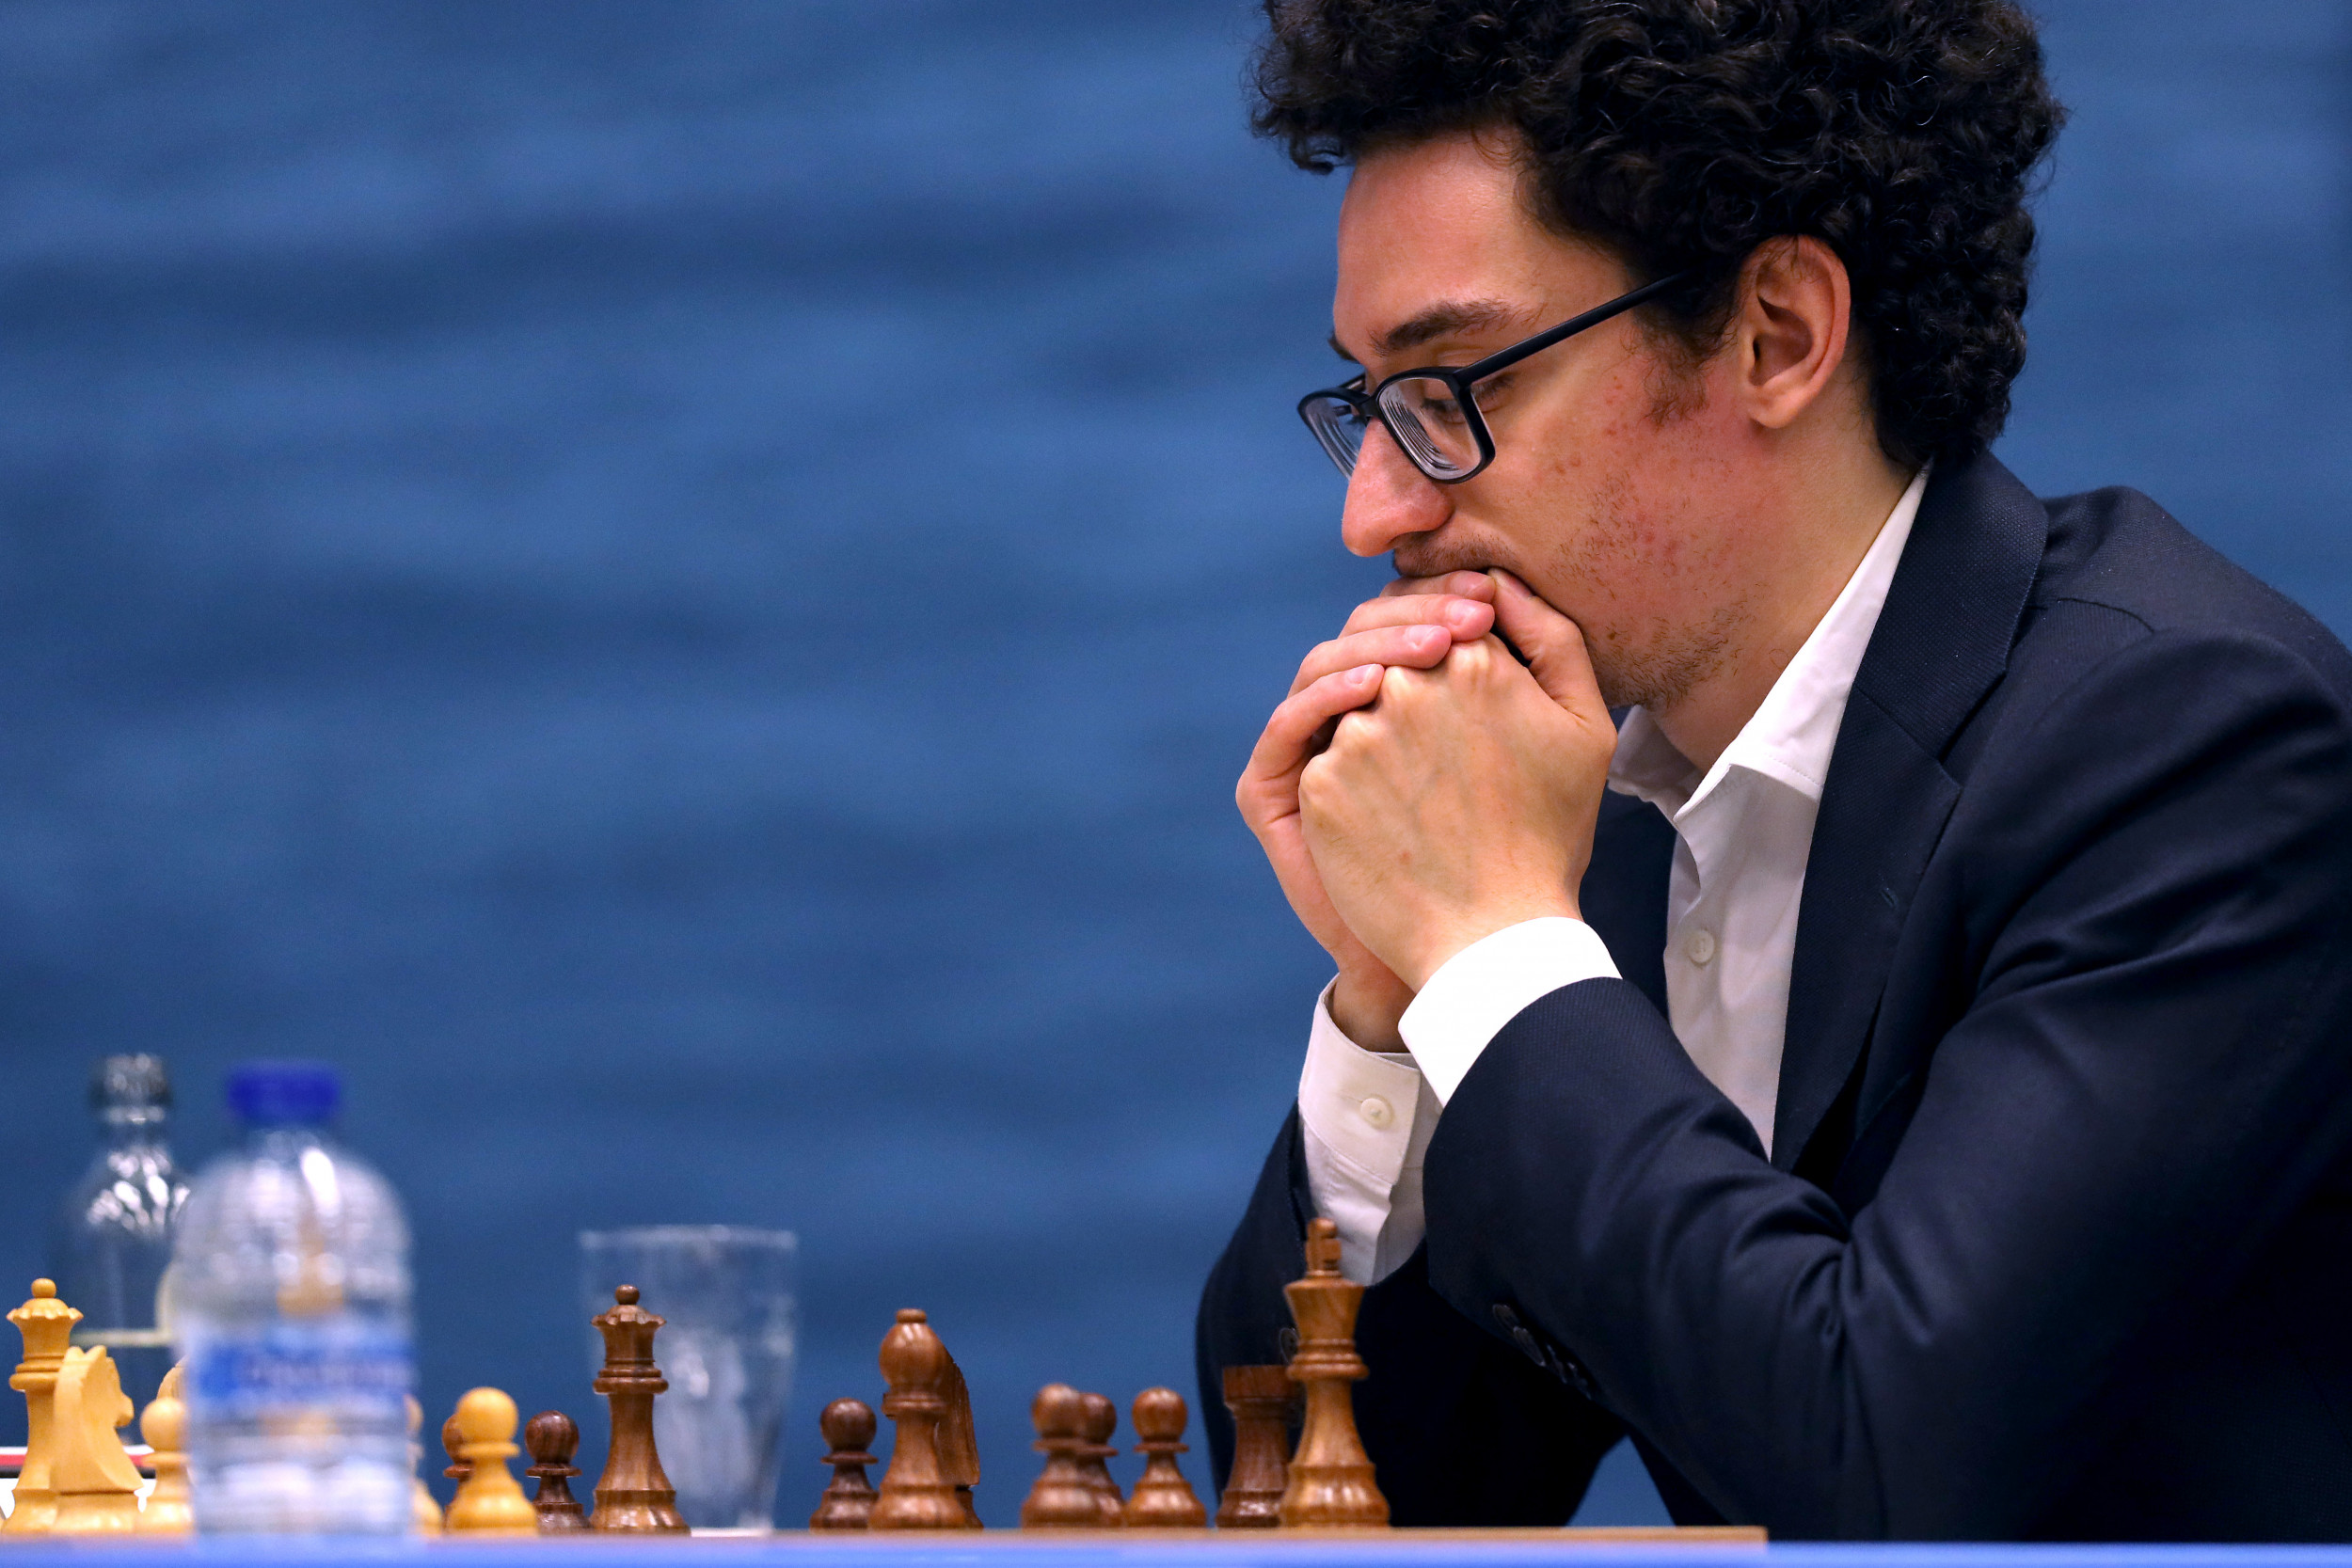 Levon Aronian in the top 10 of the best chess players in FIDE ratings